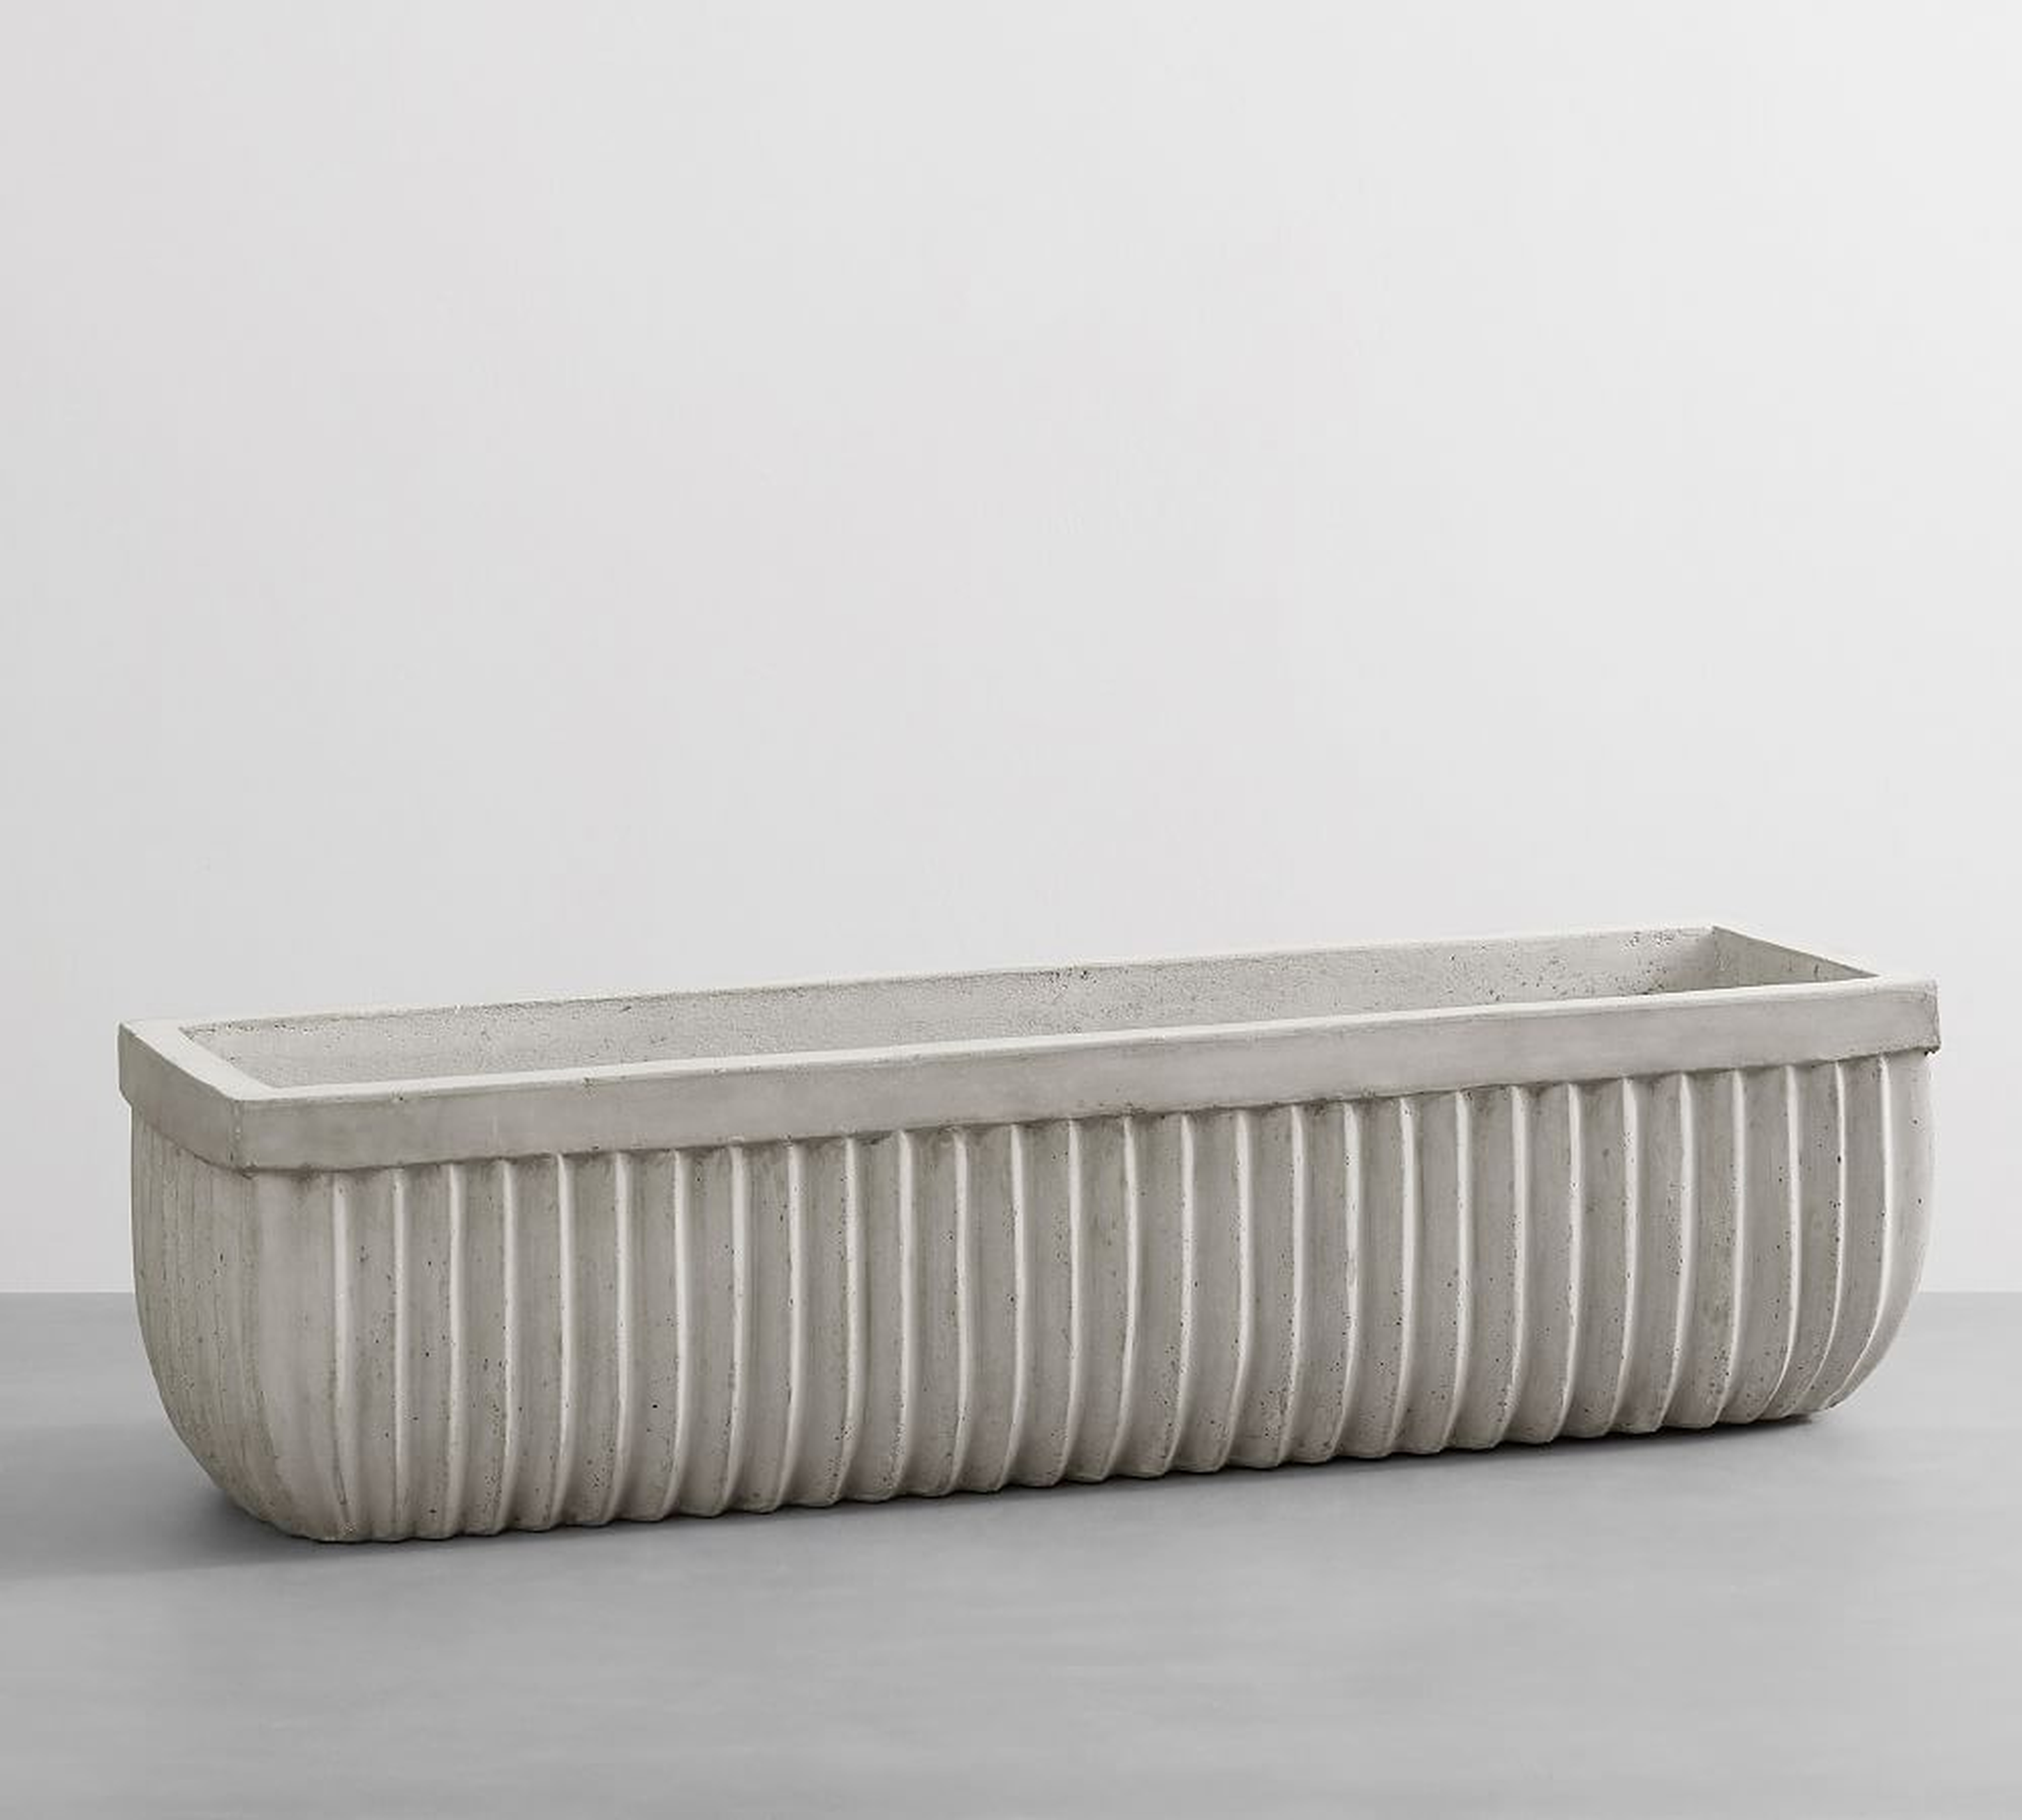 Concrete Fluted Planter, Grey,  31.5" W x 8.75" d x 8" H - Pottery Barn